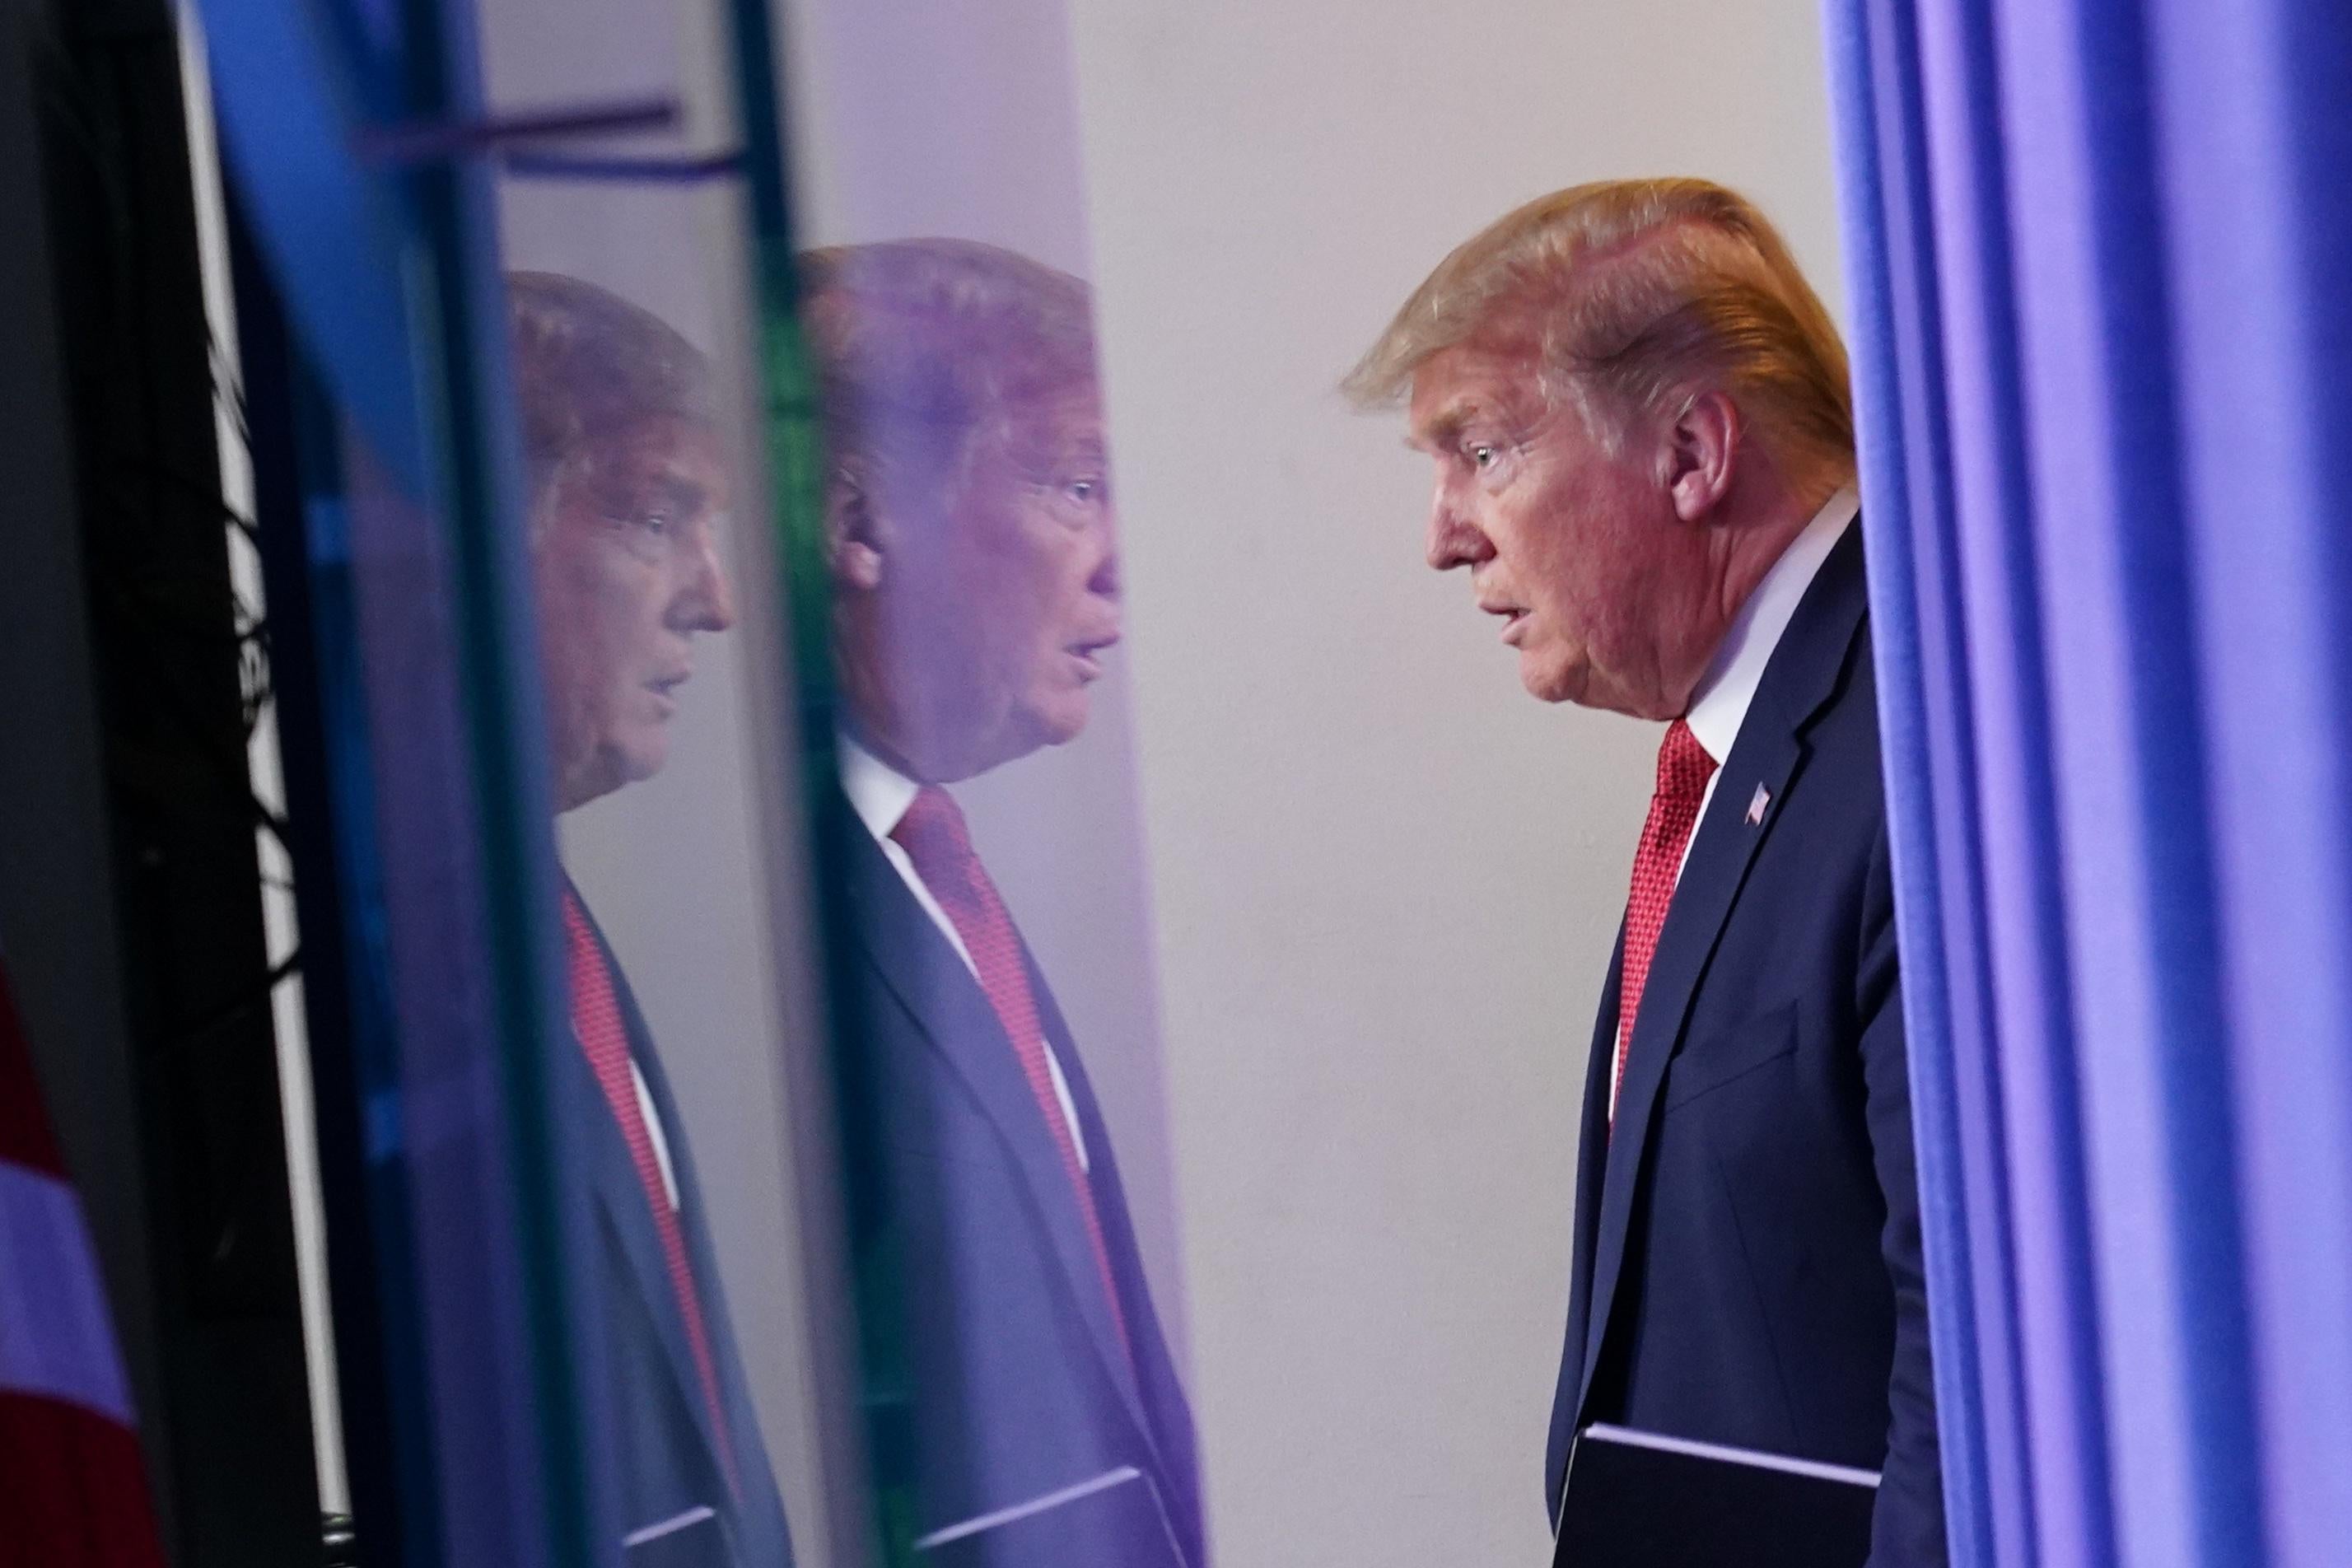 Donald Trump reflected across two screens.